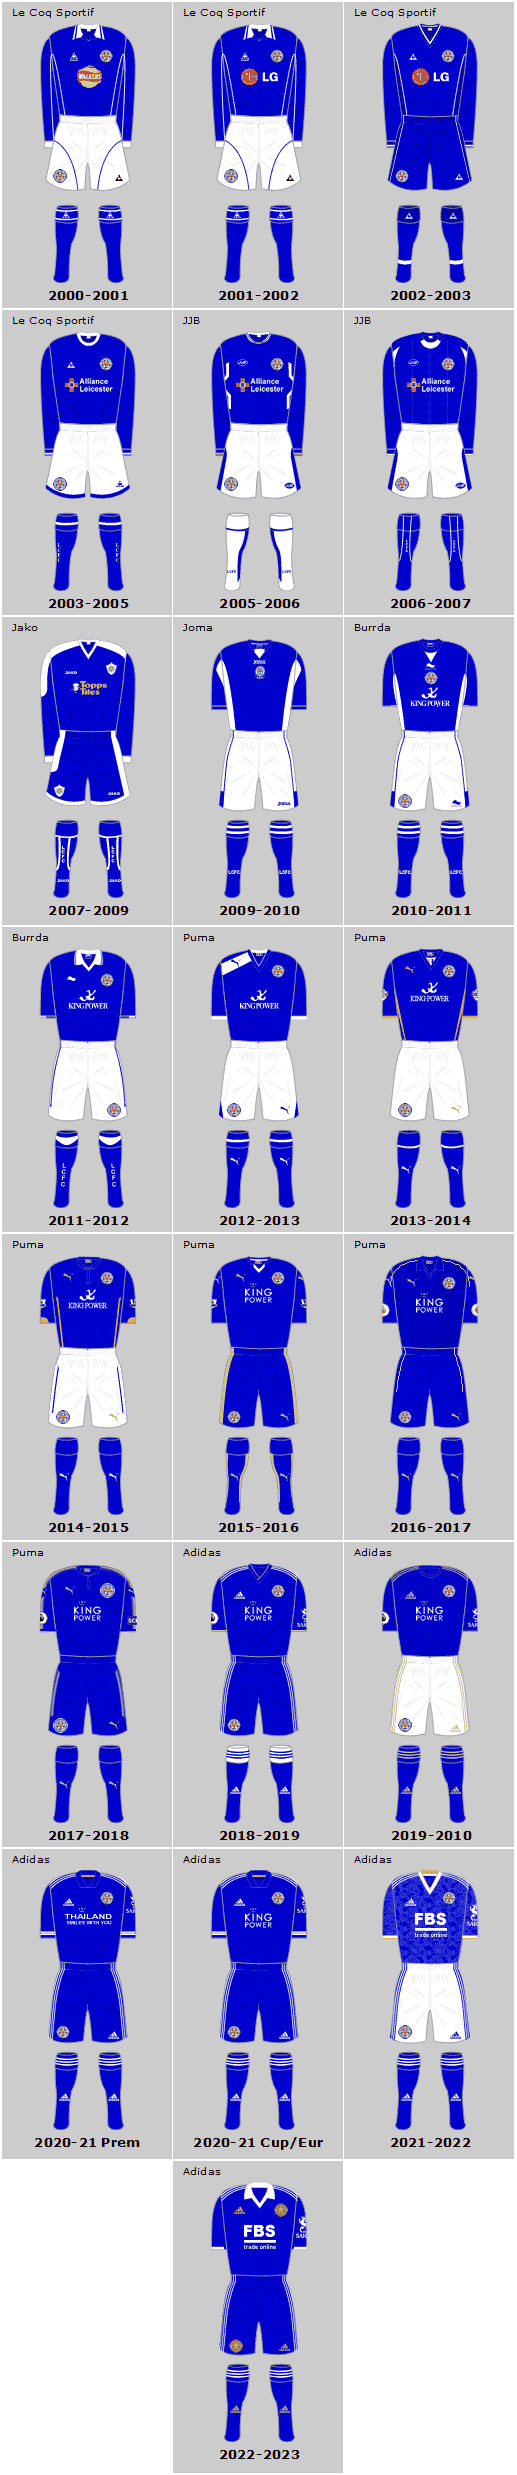 Leicester City 21st Century Home Playing Kits